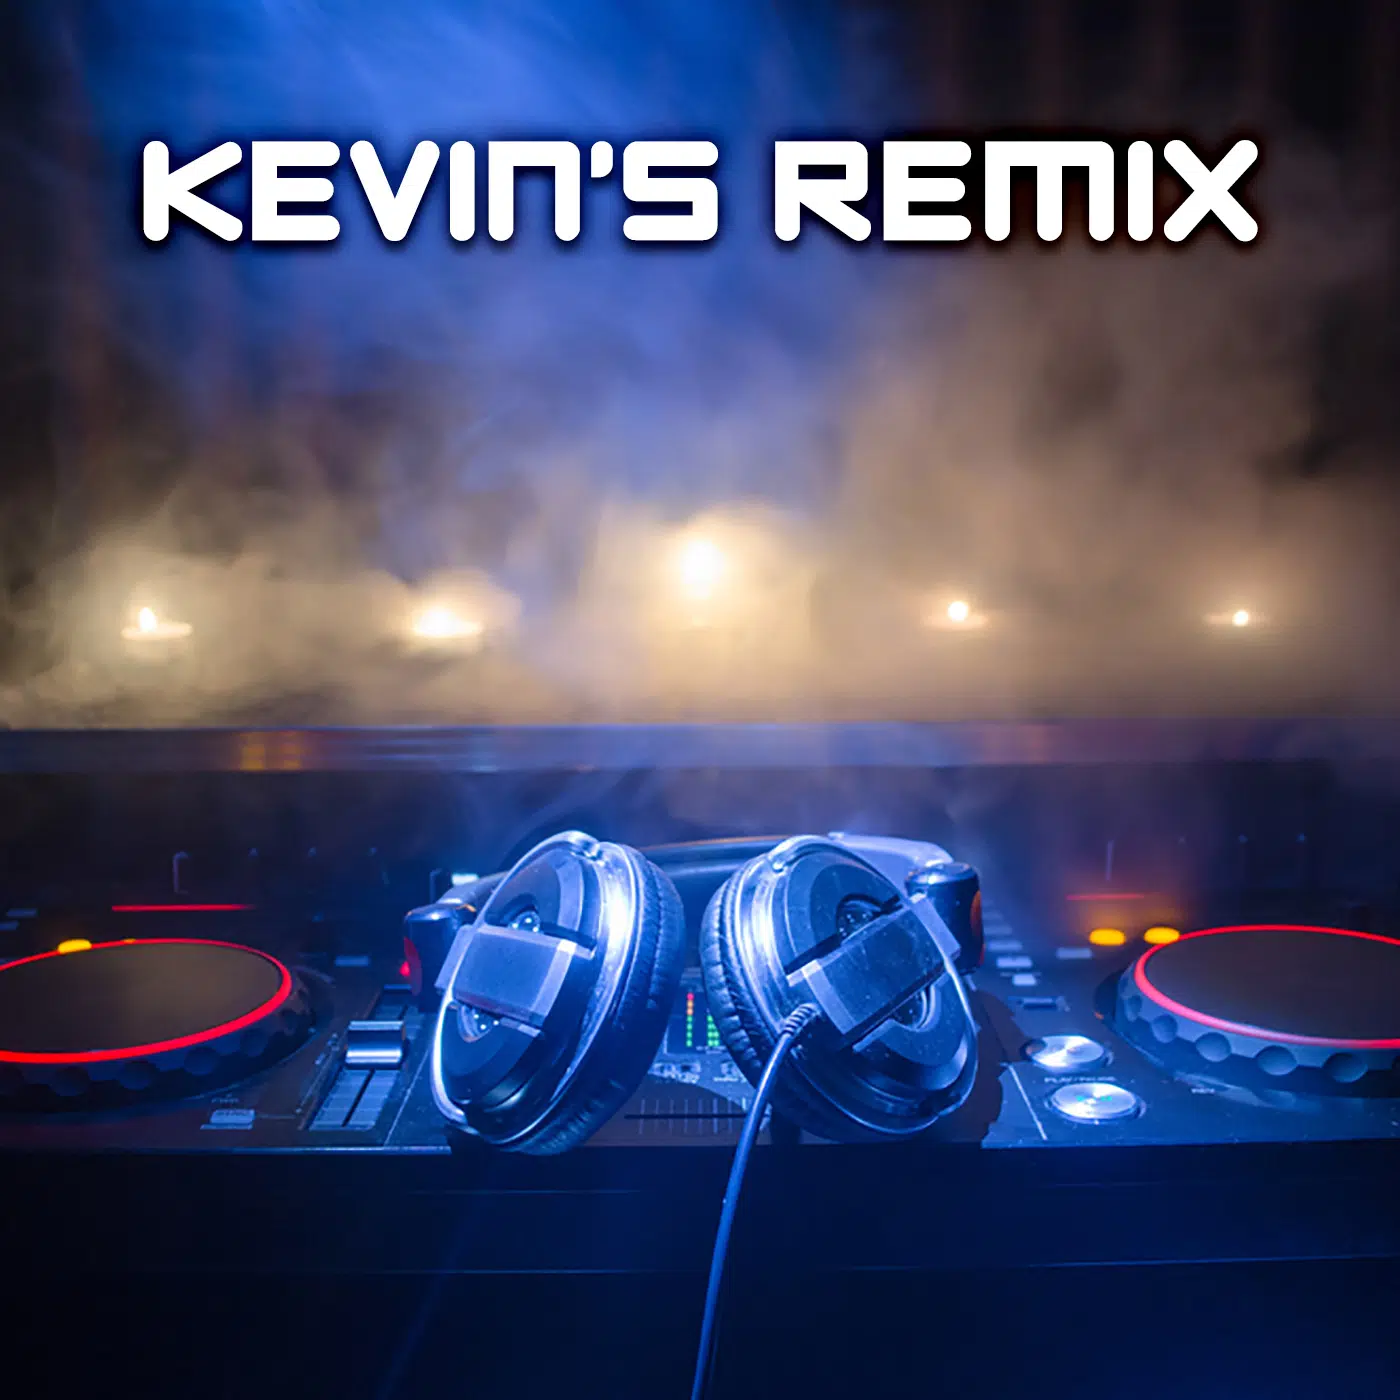 Kevin's Remix